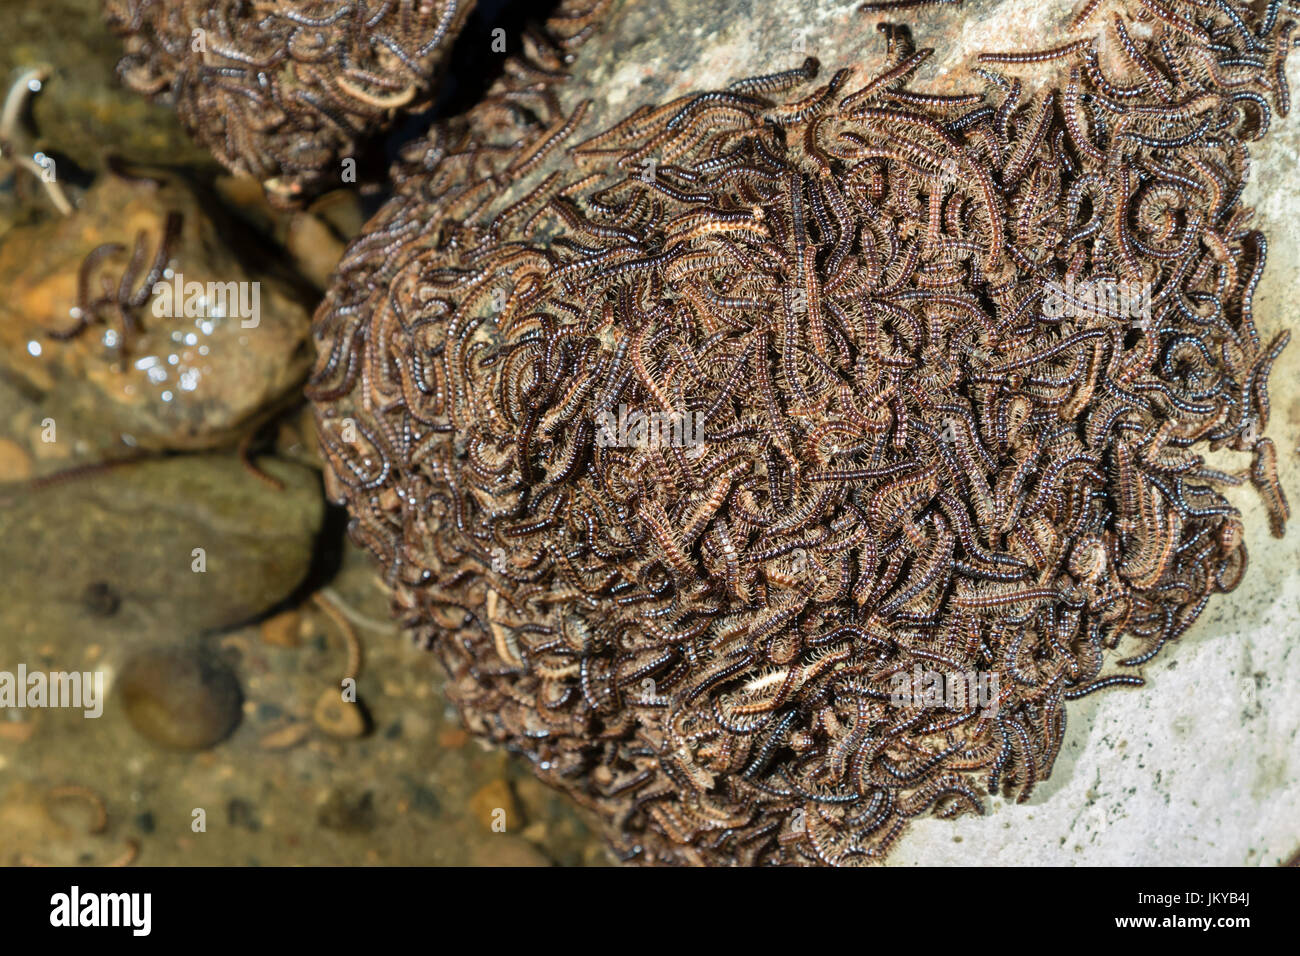 Multiple Greenhouse Millipedes (Oxidus gracilis) gathering on a rock during mating period, Ledges State Park, Iowa, USA Stock Photo